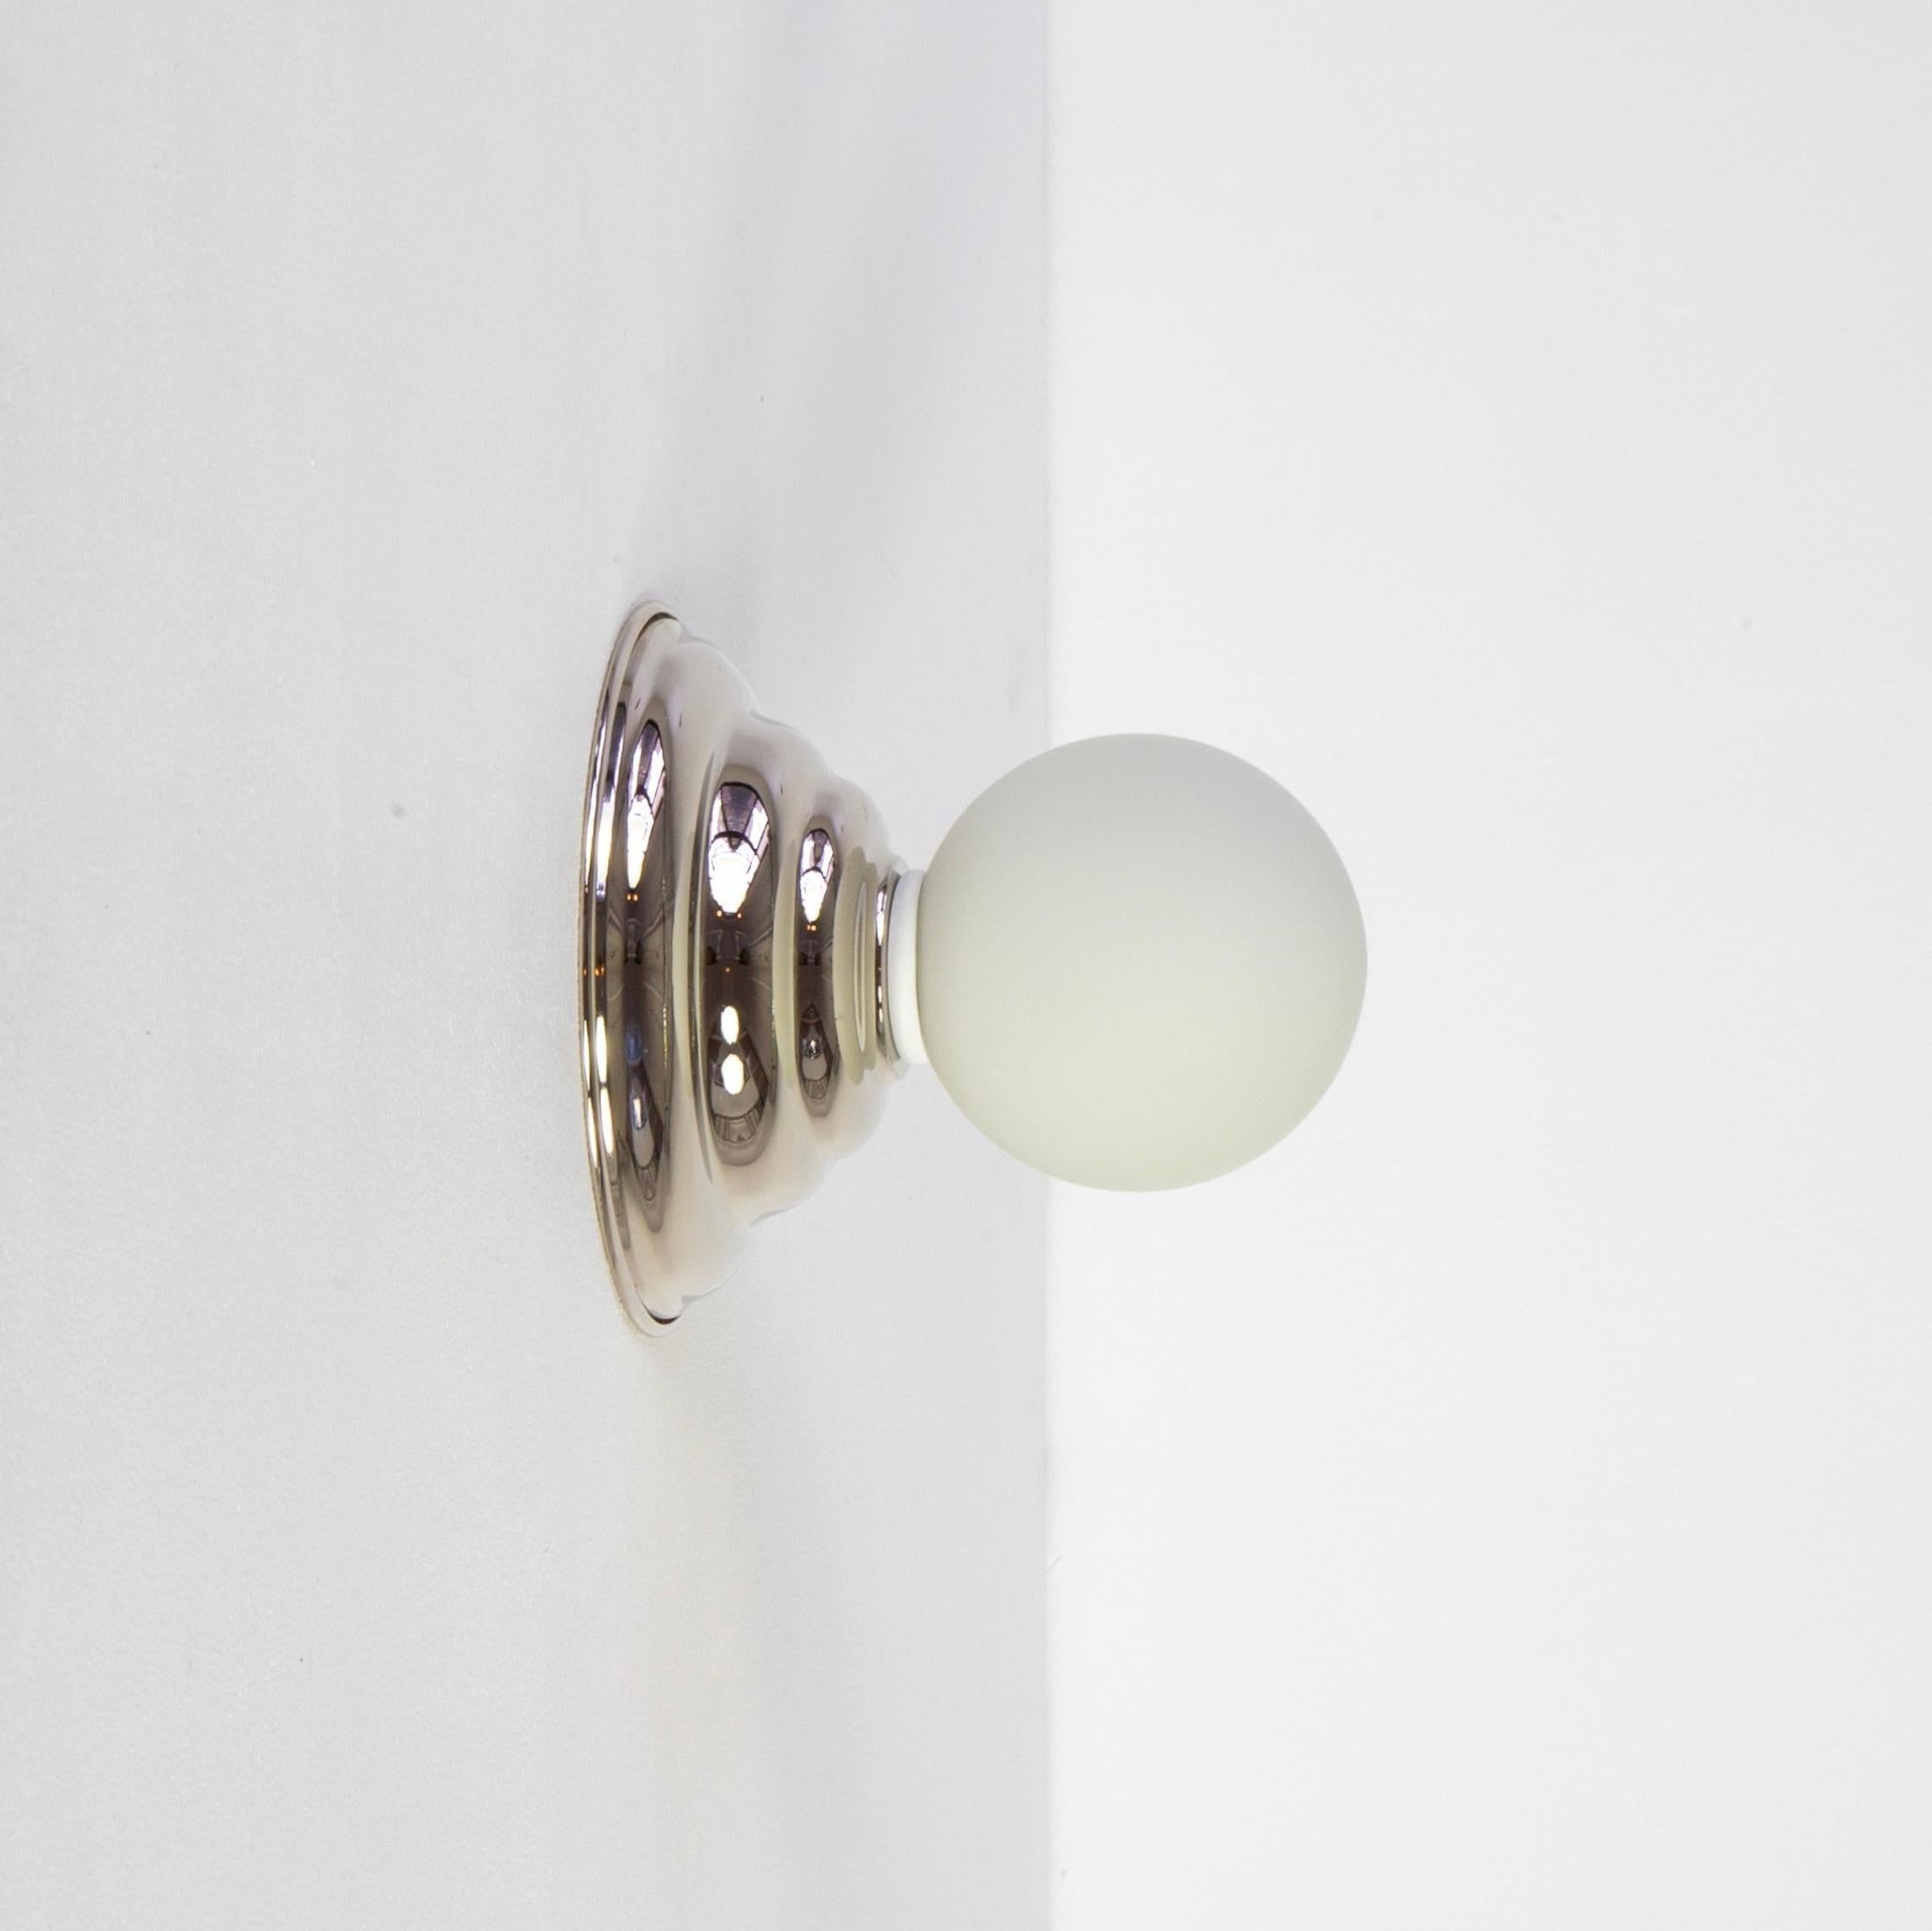 This listing is for 1x Hive Sconce in polished nickel designed and manufactured by Research.Lighting.

Materials: Brass, Steel & Glass
Finish: Polished Nickel
Electronics: 1x G9 Socket, 1x 4.5 Watt LED Bulb (included), 450 Lumens
UL Listed. Made in